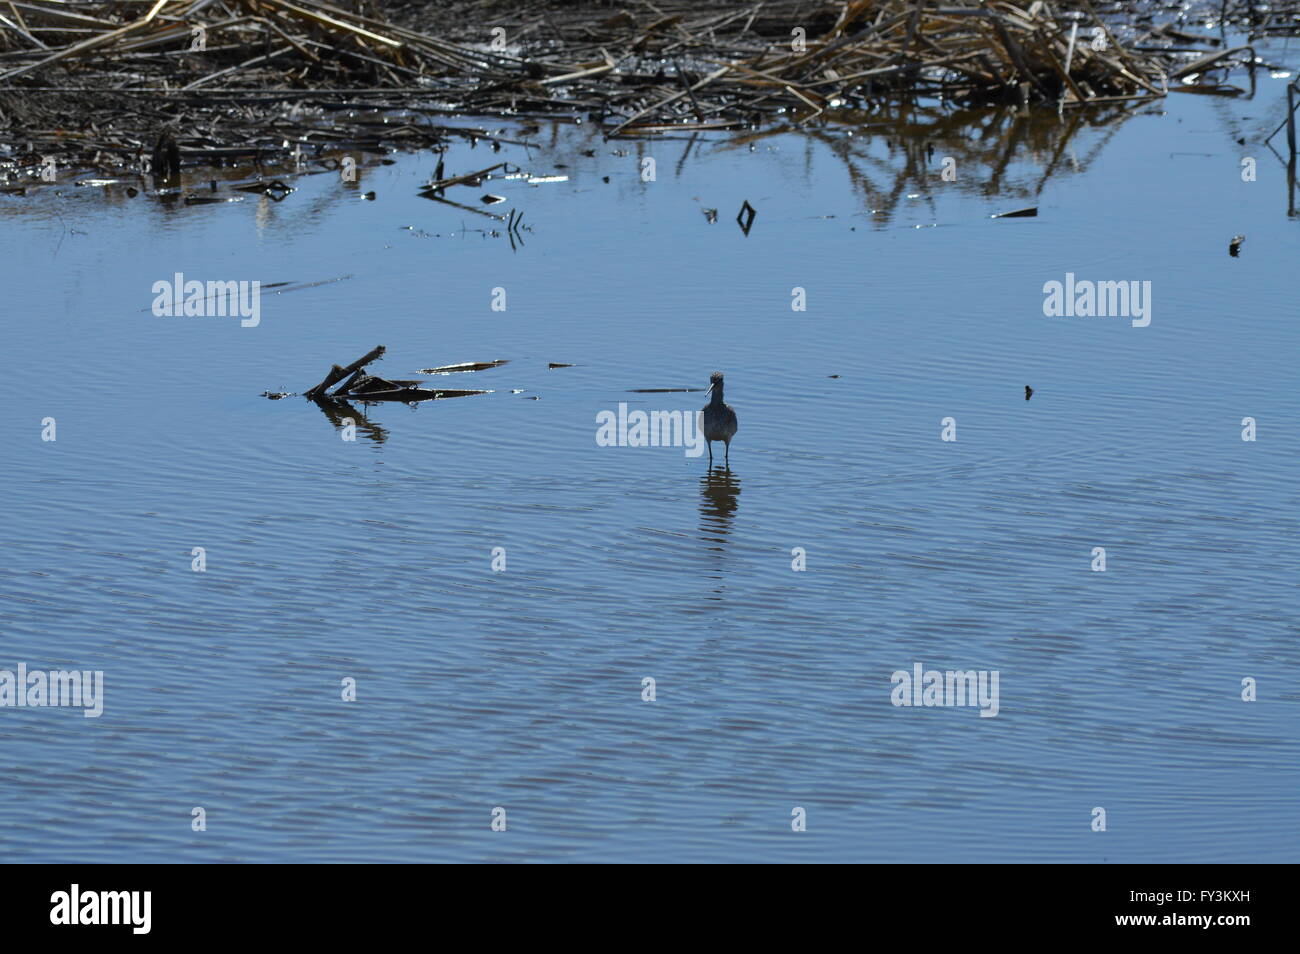 Bird with Long Legs and Beak in the Wetland Stock Photo